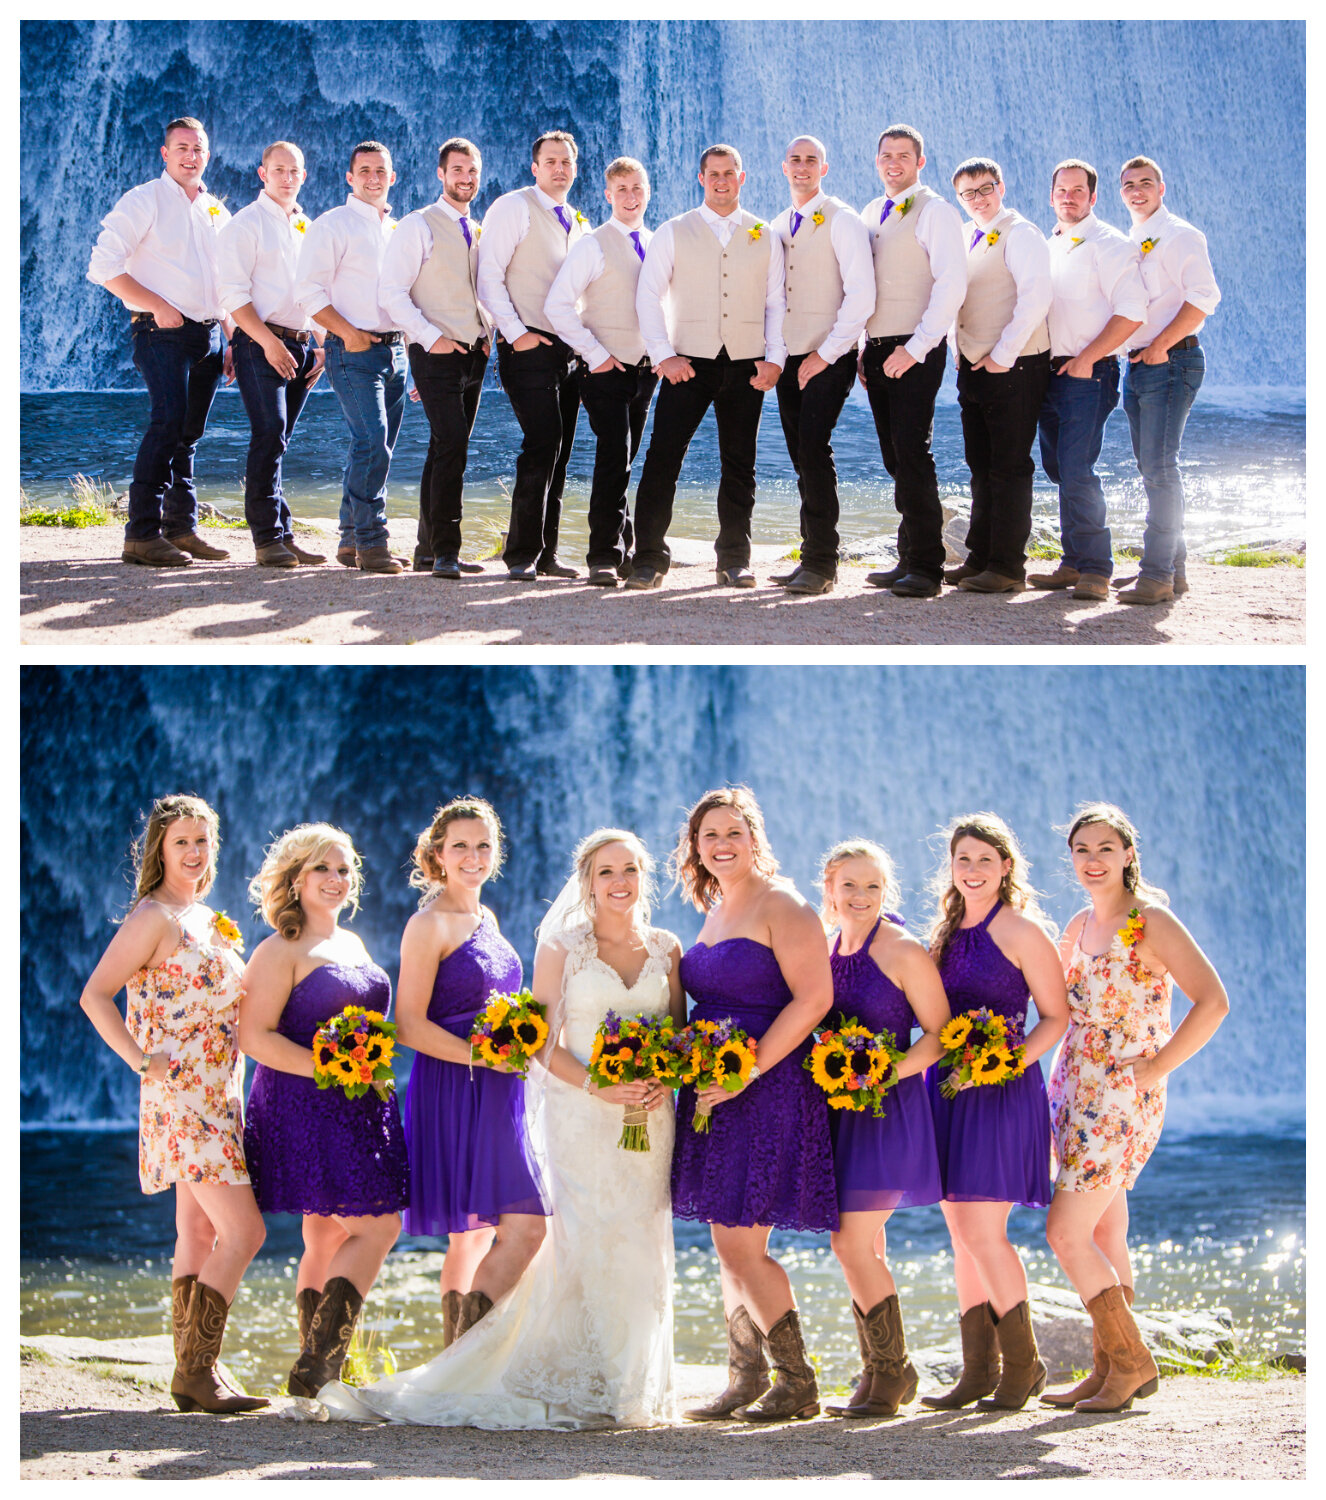  Wedding party.&nbsp;Wedding at The barn at Evergreen Memorial. Photographed by JMGant Photography. 